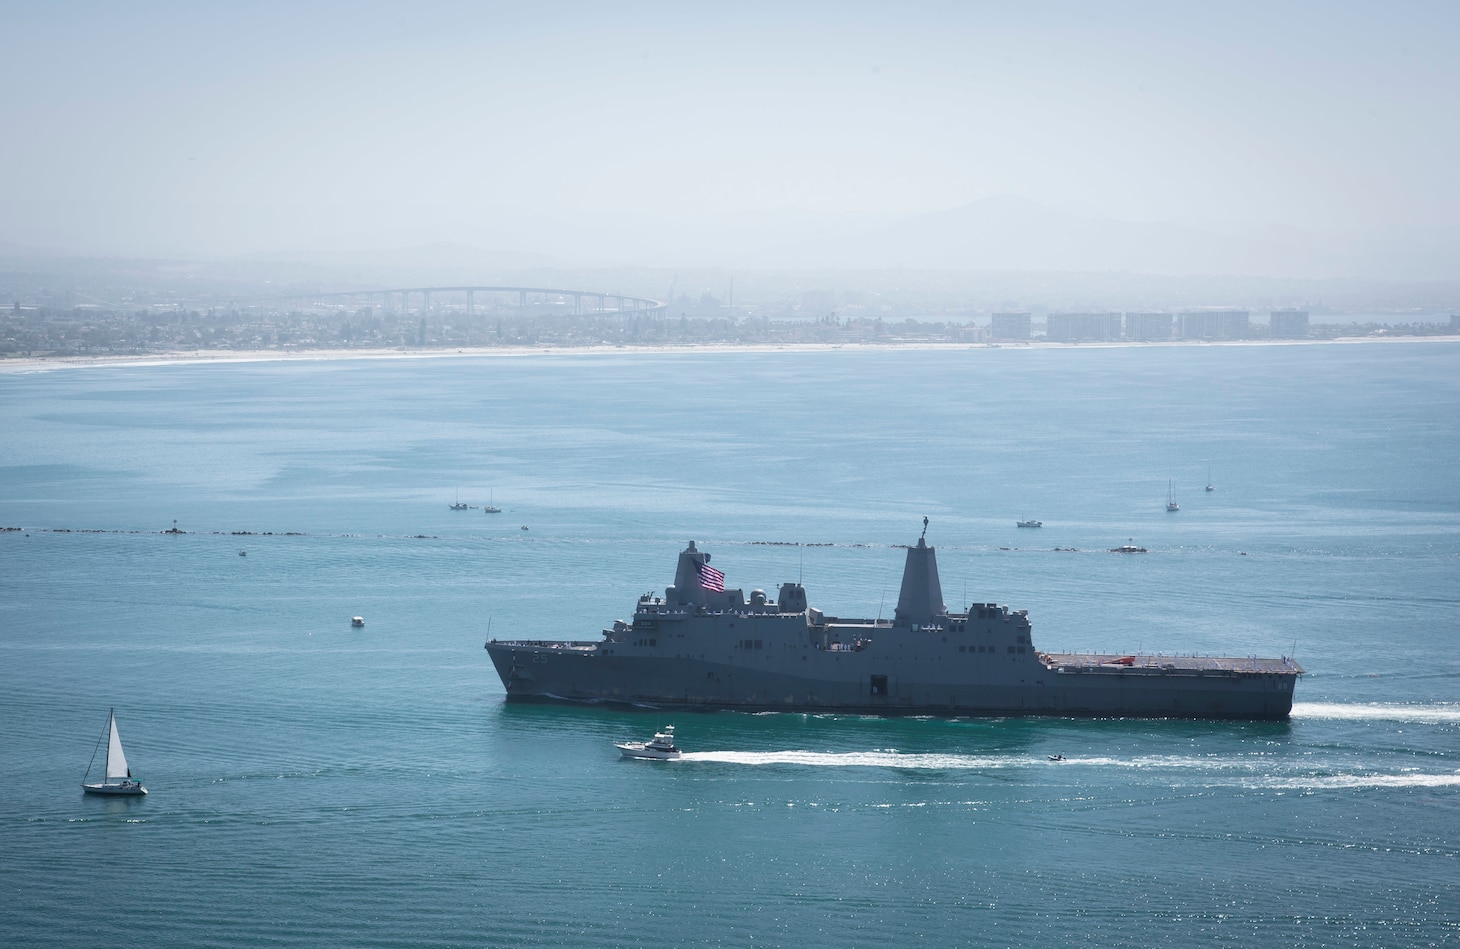 SAN DIEGO (May 23, 2021) Amphibious transport dock ship USS Somerset (LPD 25) returns to its homeport Naval Base San Diego. Somerset, a part of the Makin Island Amphibious Ready Group, returned to Naval Base San Diego May 23rd after a deployment to U.S. 3rd, 5th, 6th and 7th Fleets where they served as a crisis-response force for combatant commanders in the Africa, Central and Indo-Pacific Commands. (U.S. Navy photo by Mass Communication Specialist 2nd Class Robert S. Price/Released)